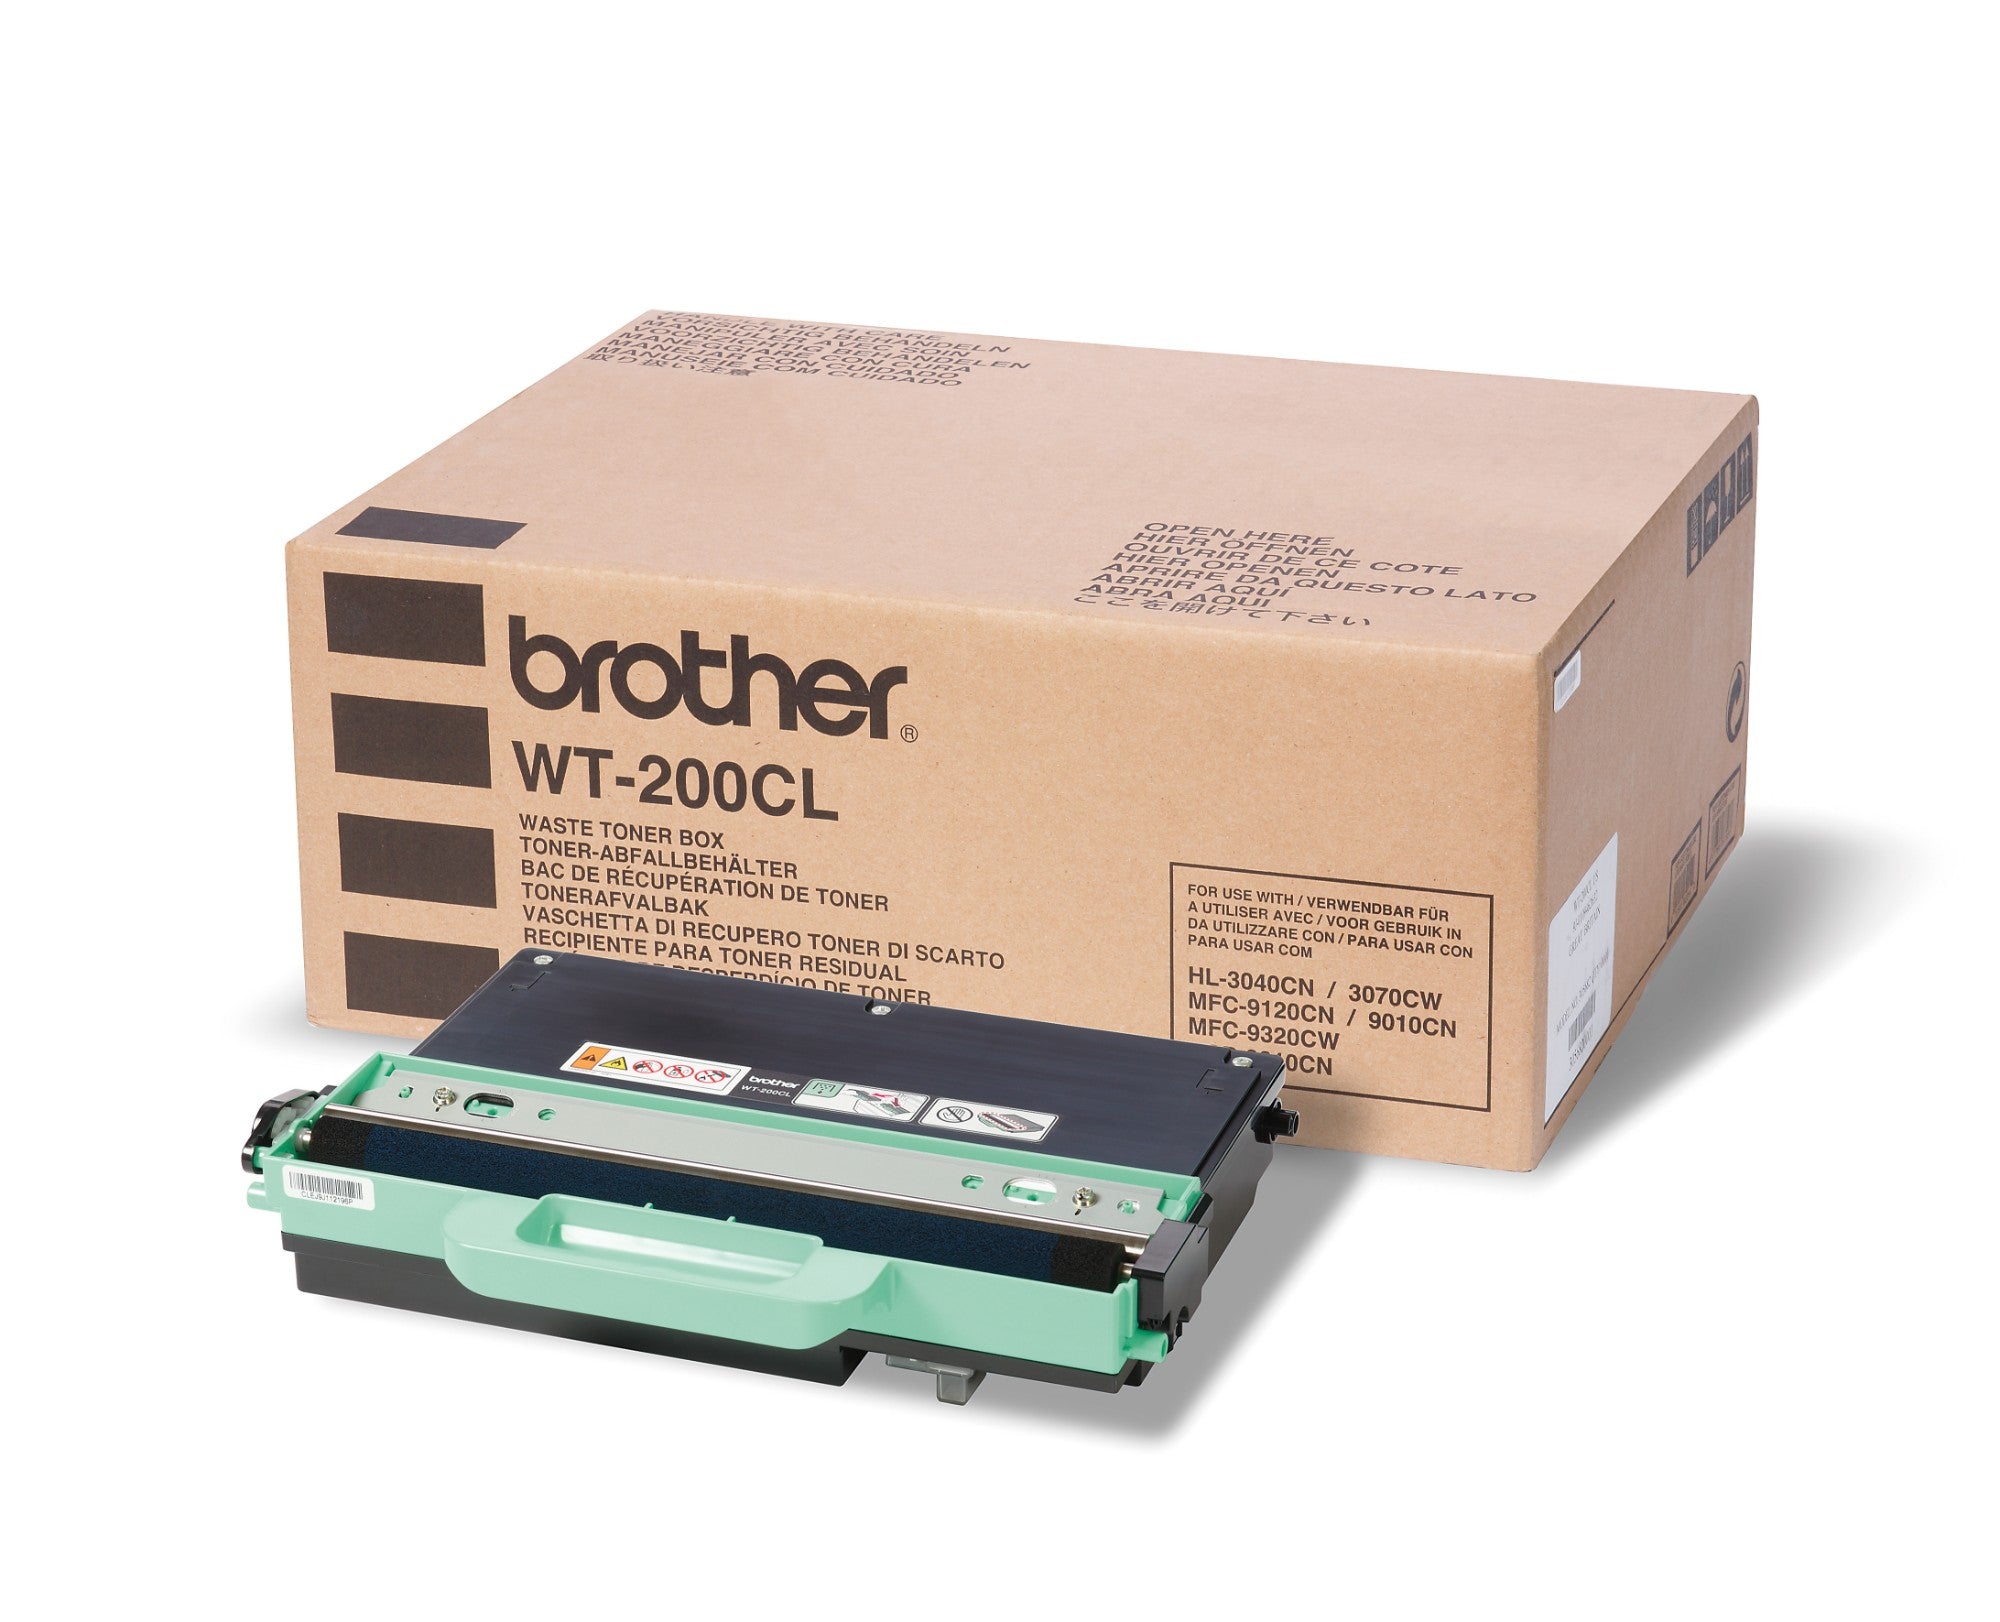 Brother WT-200CL Toner waste box, 50K pages for Brother HL-3040 CN